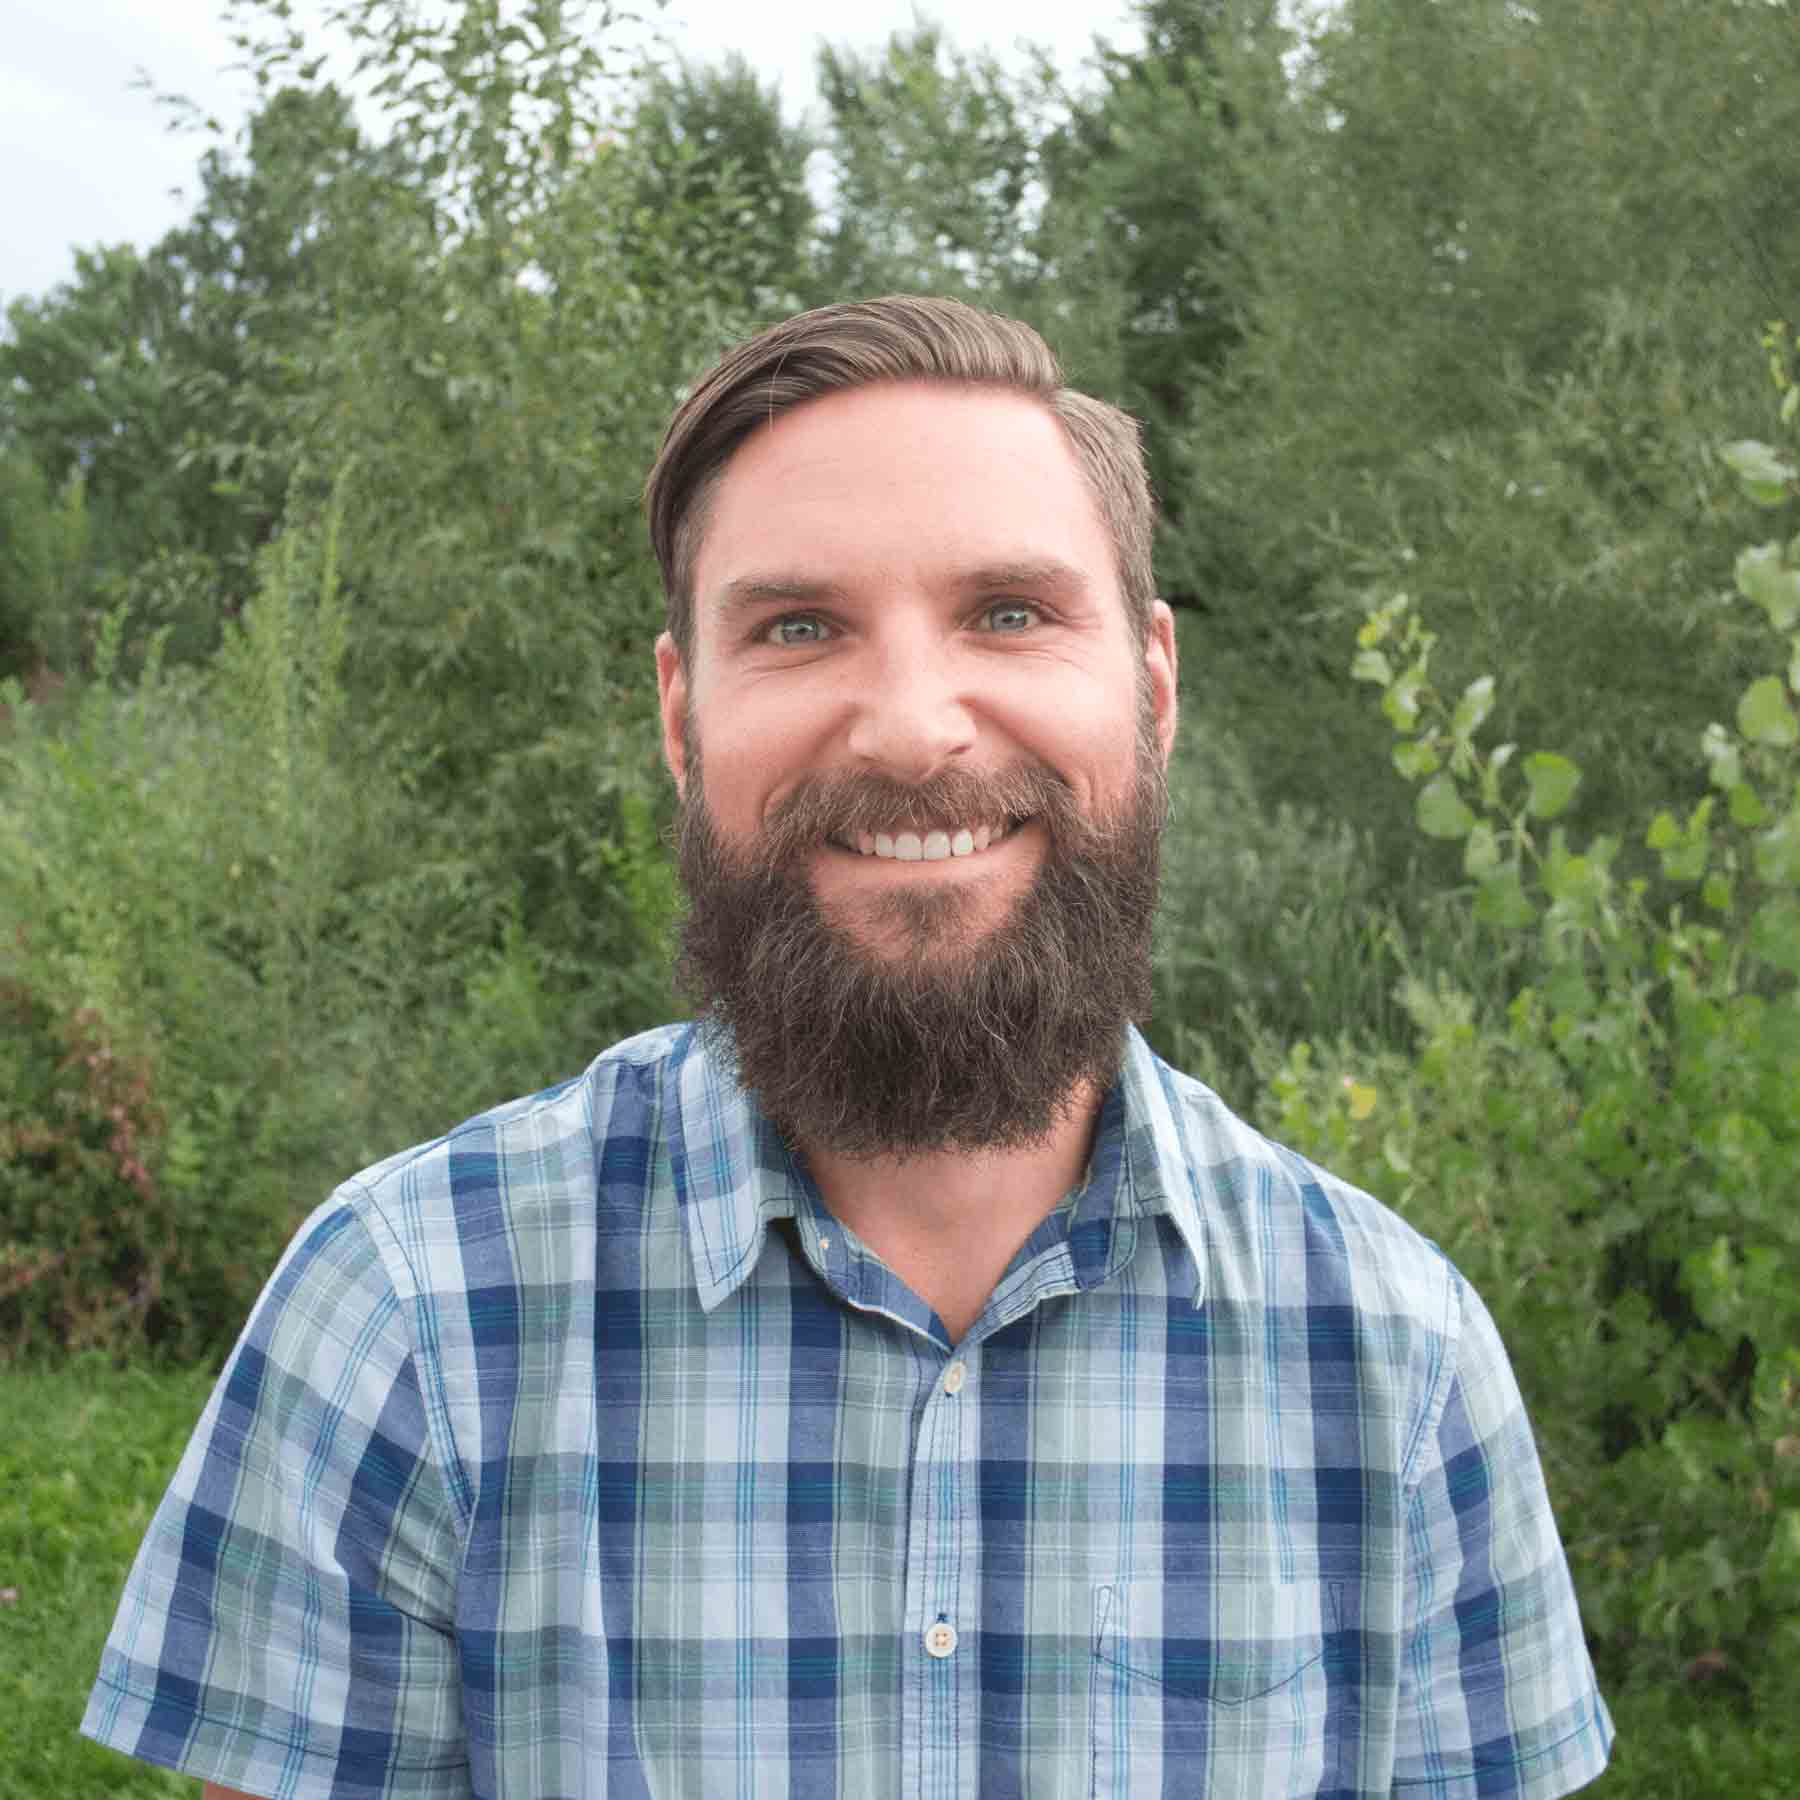 An Interview With Shawn Manske, WishGarden Territorial Account Manager